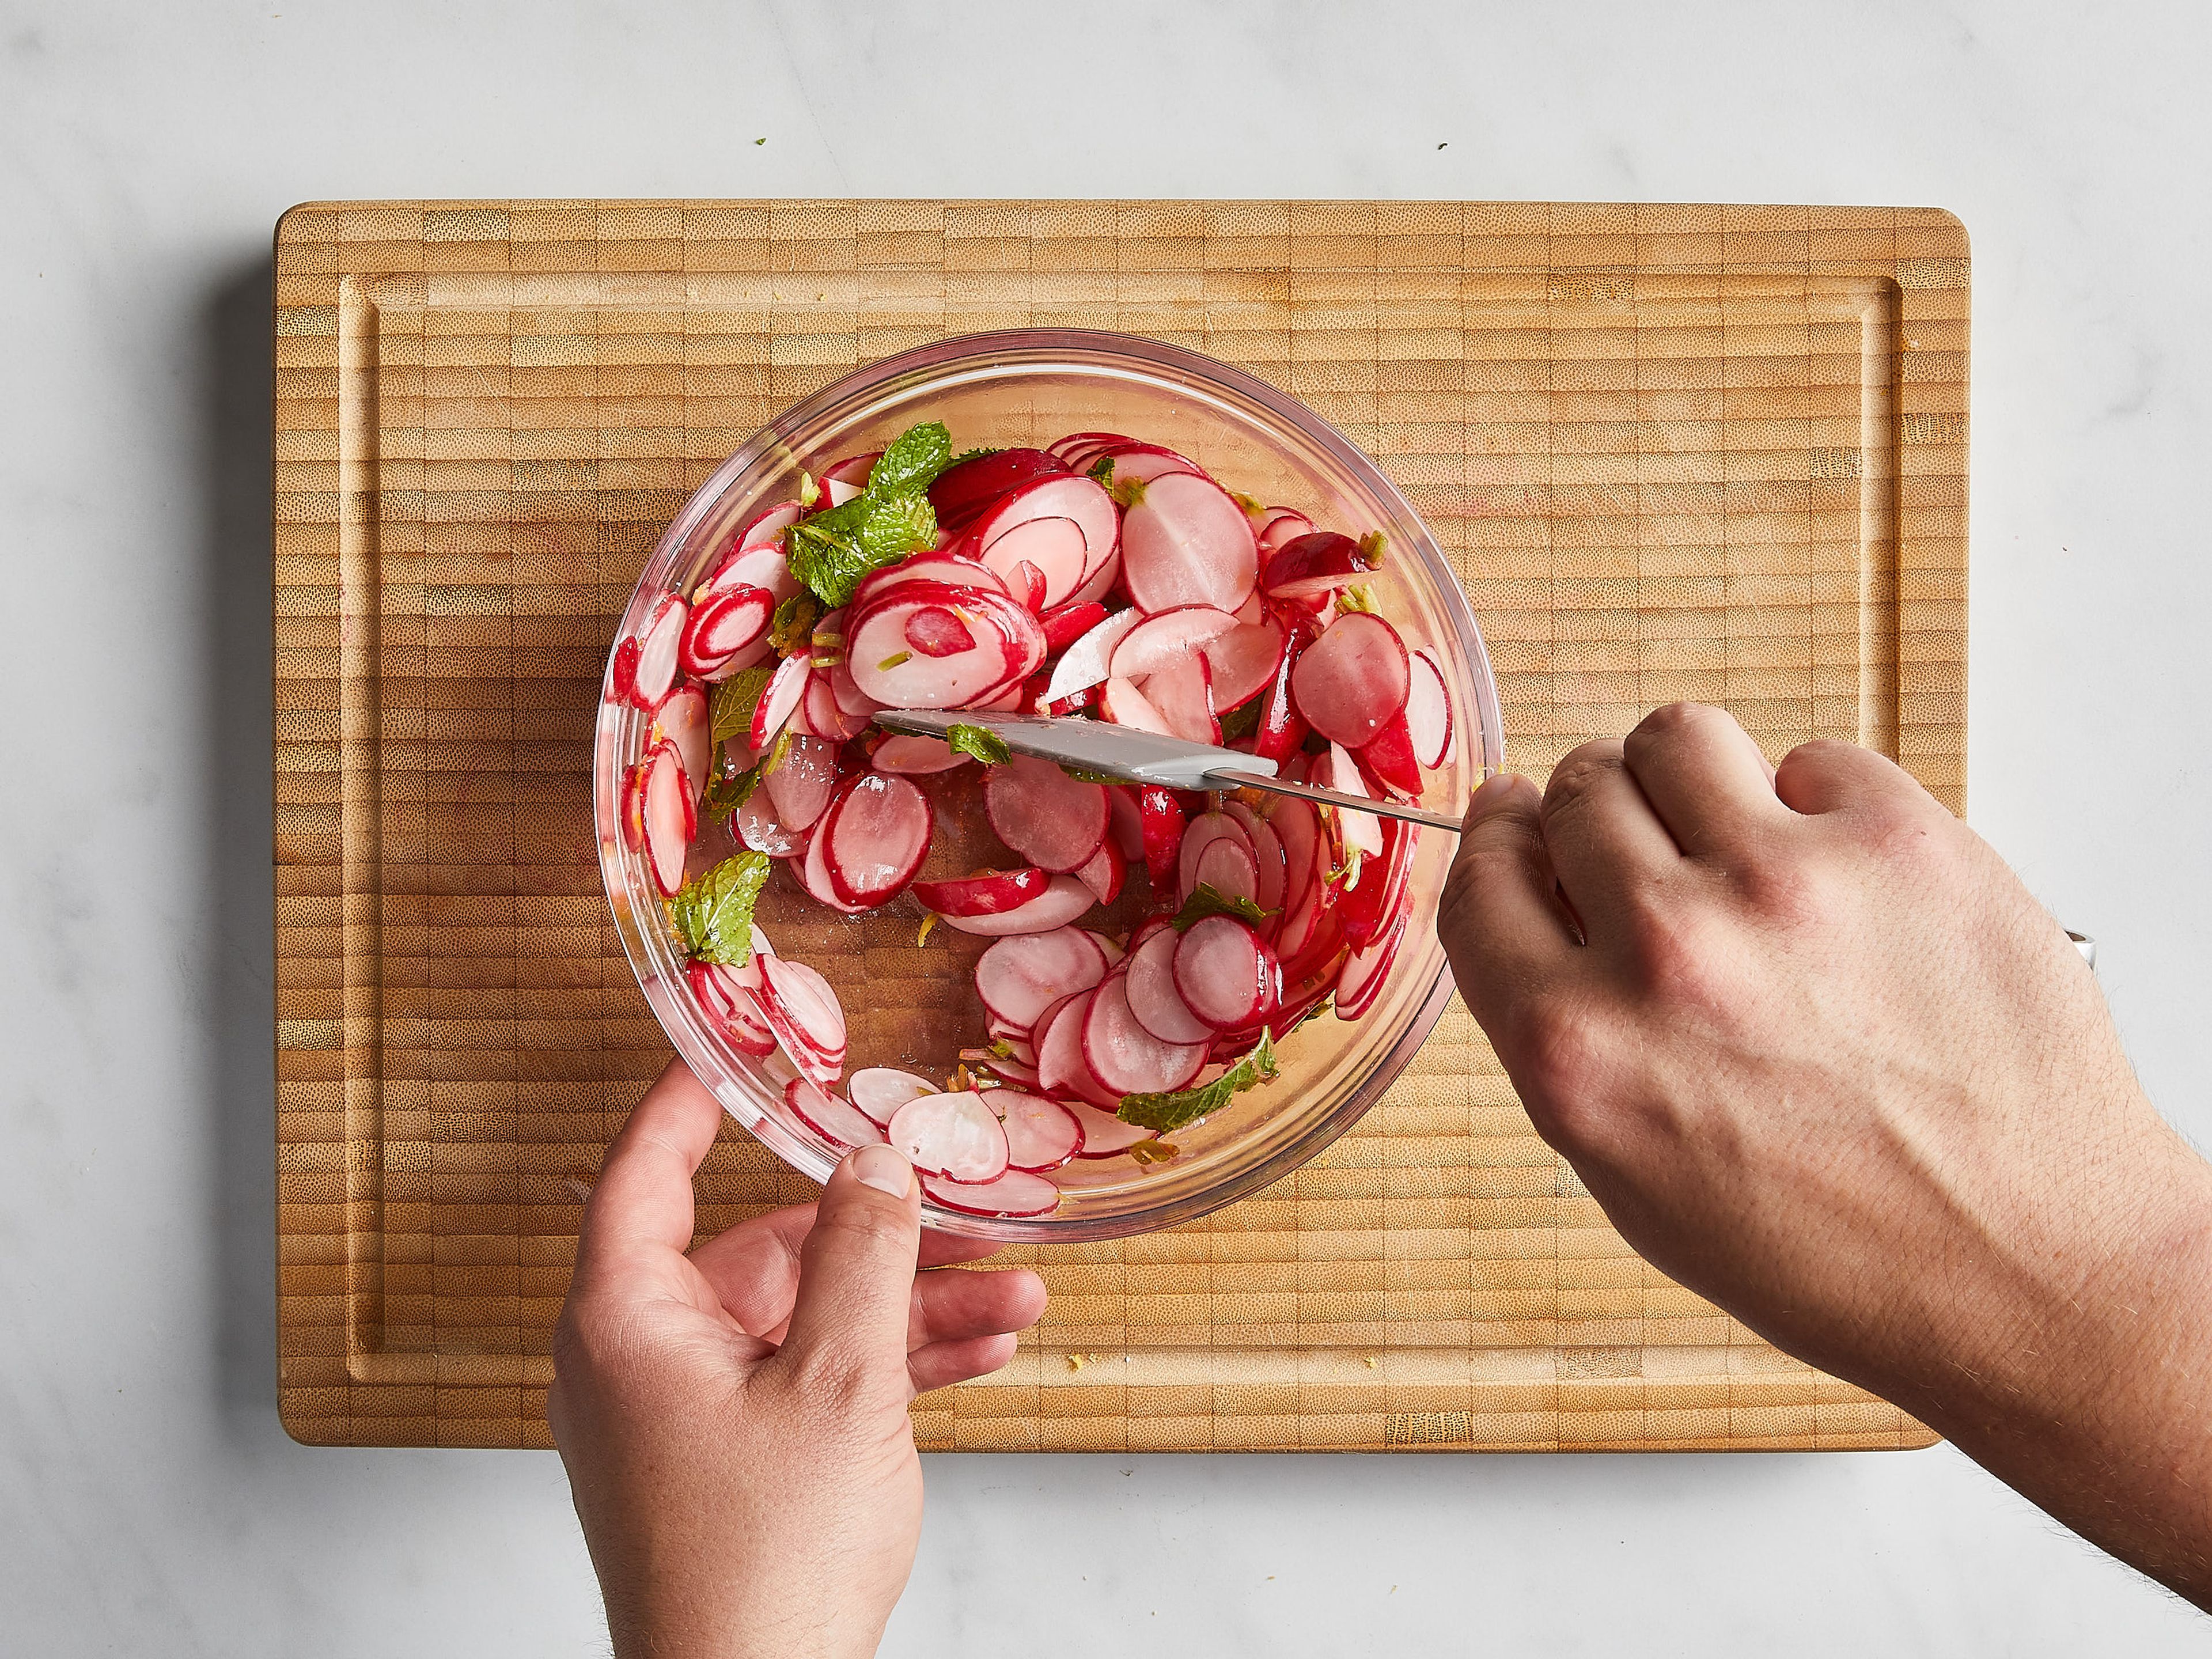 Transfer all the radishes to a large bowl. Season with salt and add half the lemon juice and zest, tossing to combine and massaging the radishes gently with your hands. Add melted butter, toss again, and taste. Add more lemon zest and juice to taste.